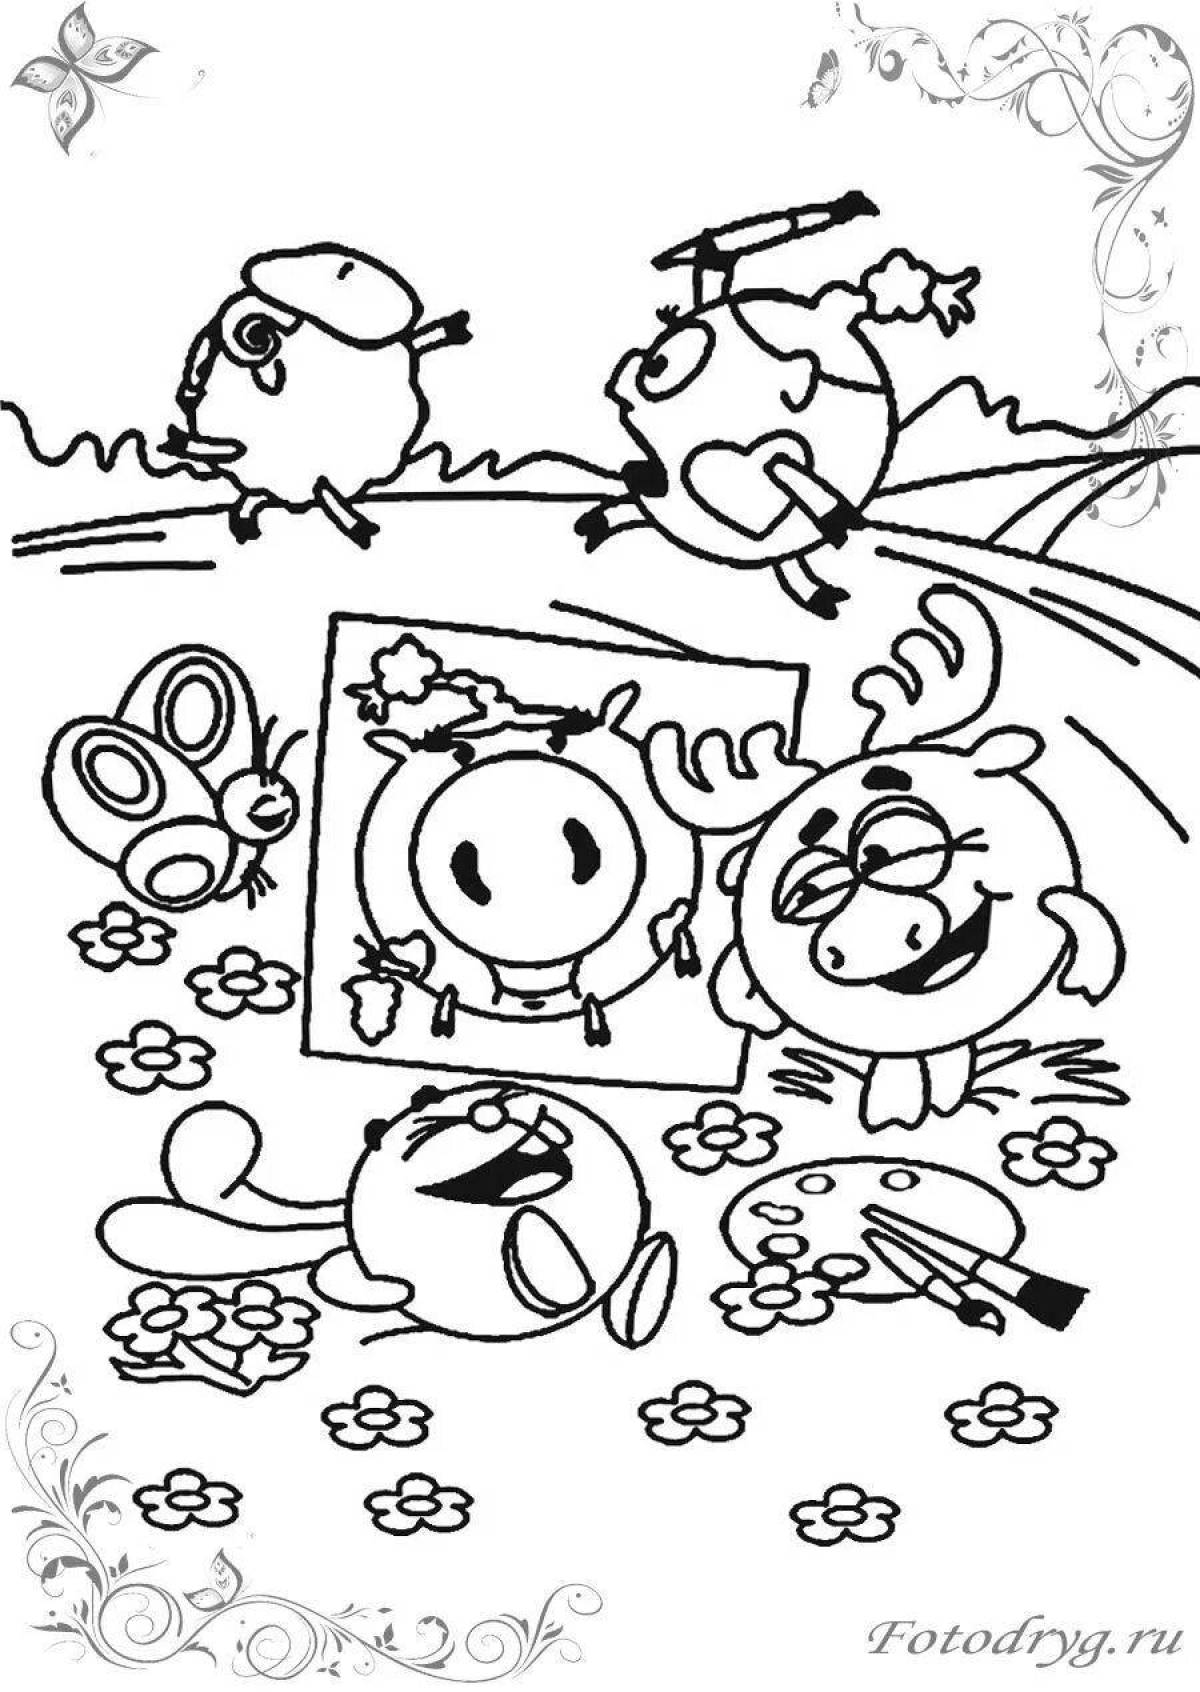 Fun complex coloring pages